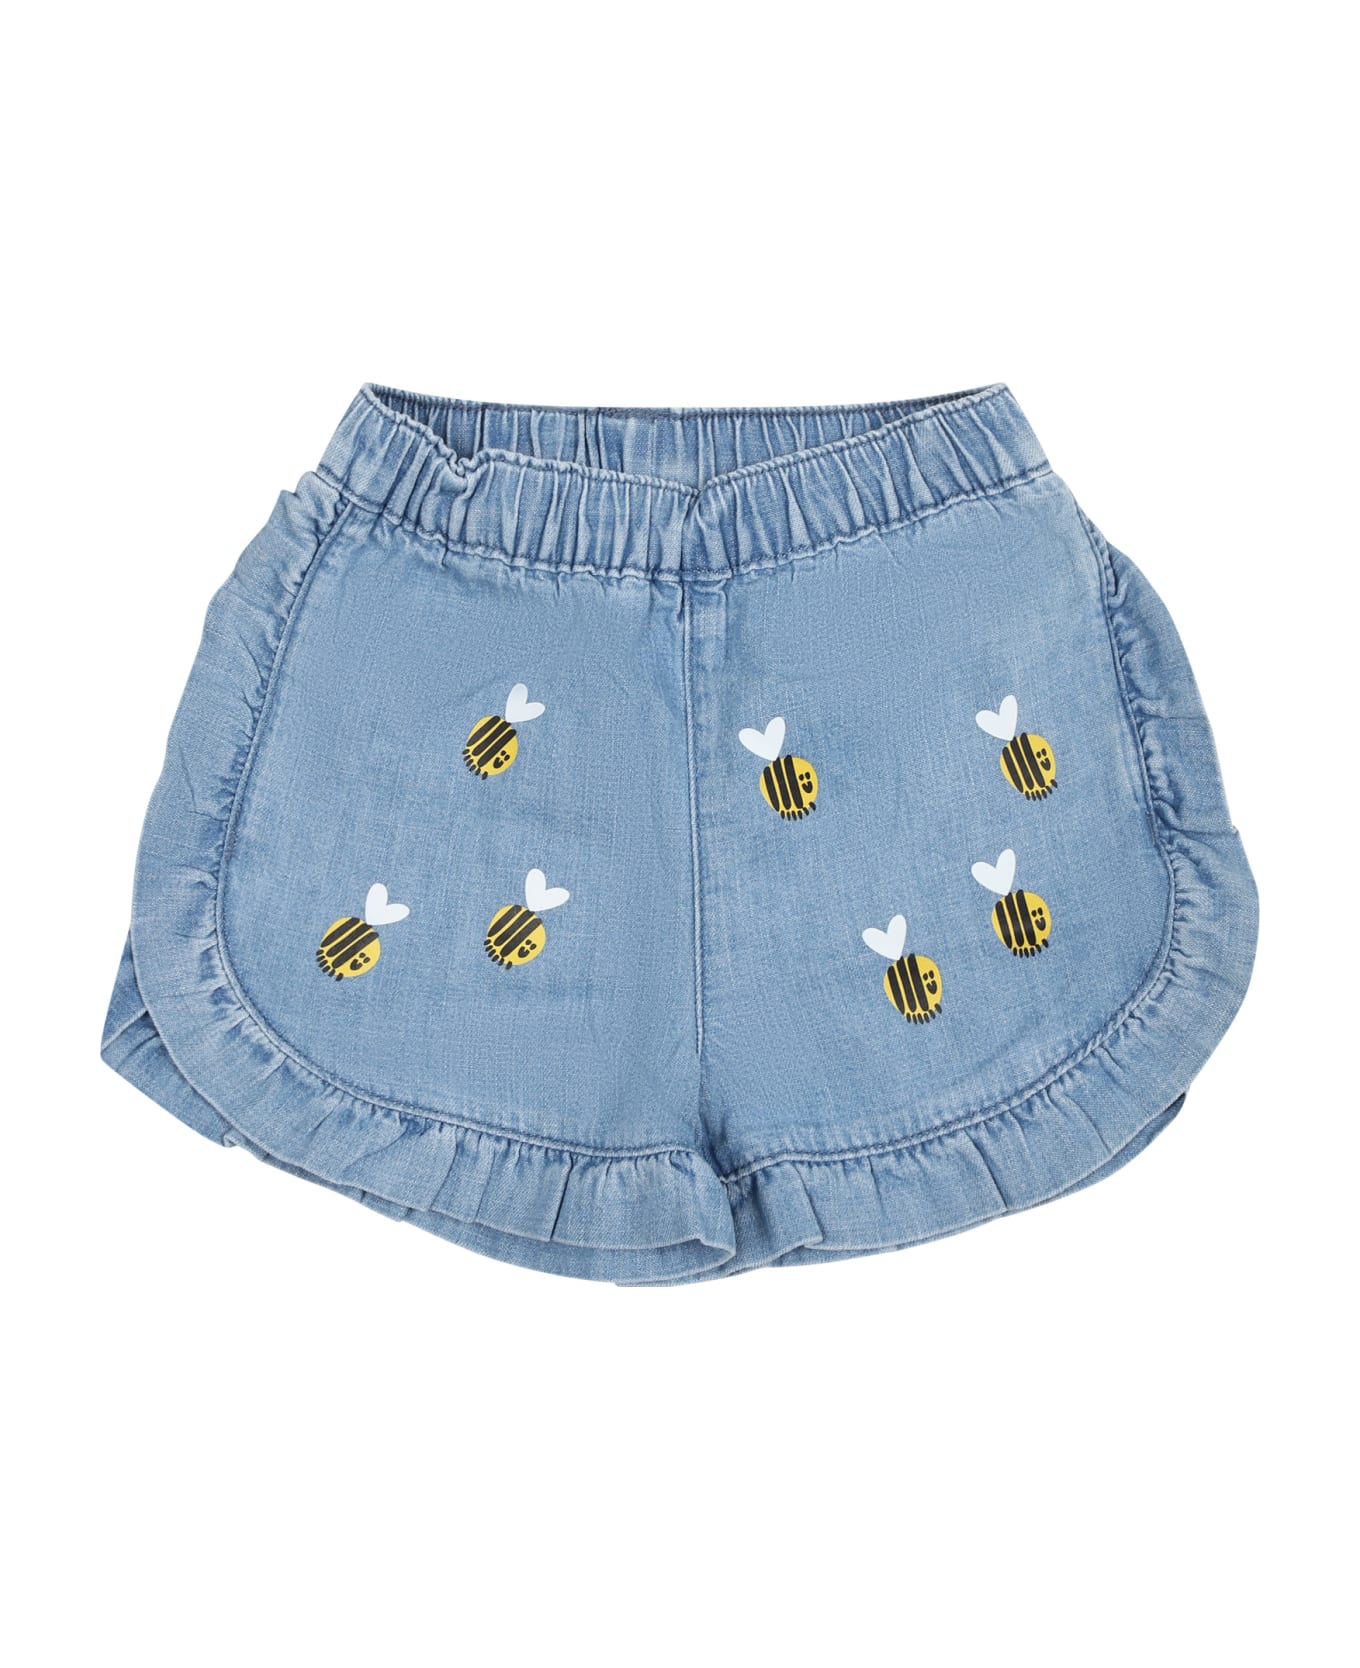 Stella McCartney Kids Blue Shorts For Baby Girl With Beees - BLUE